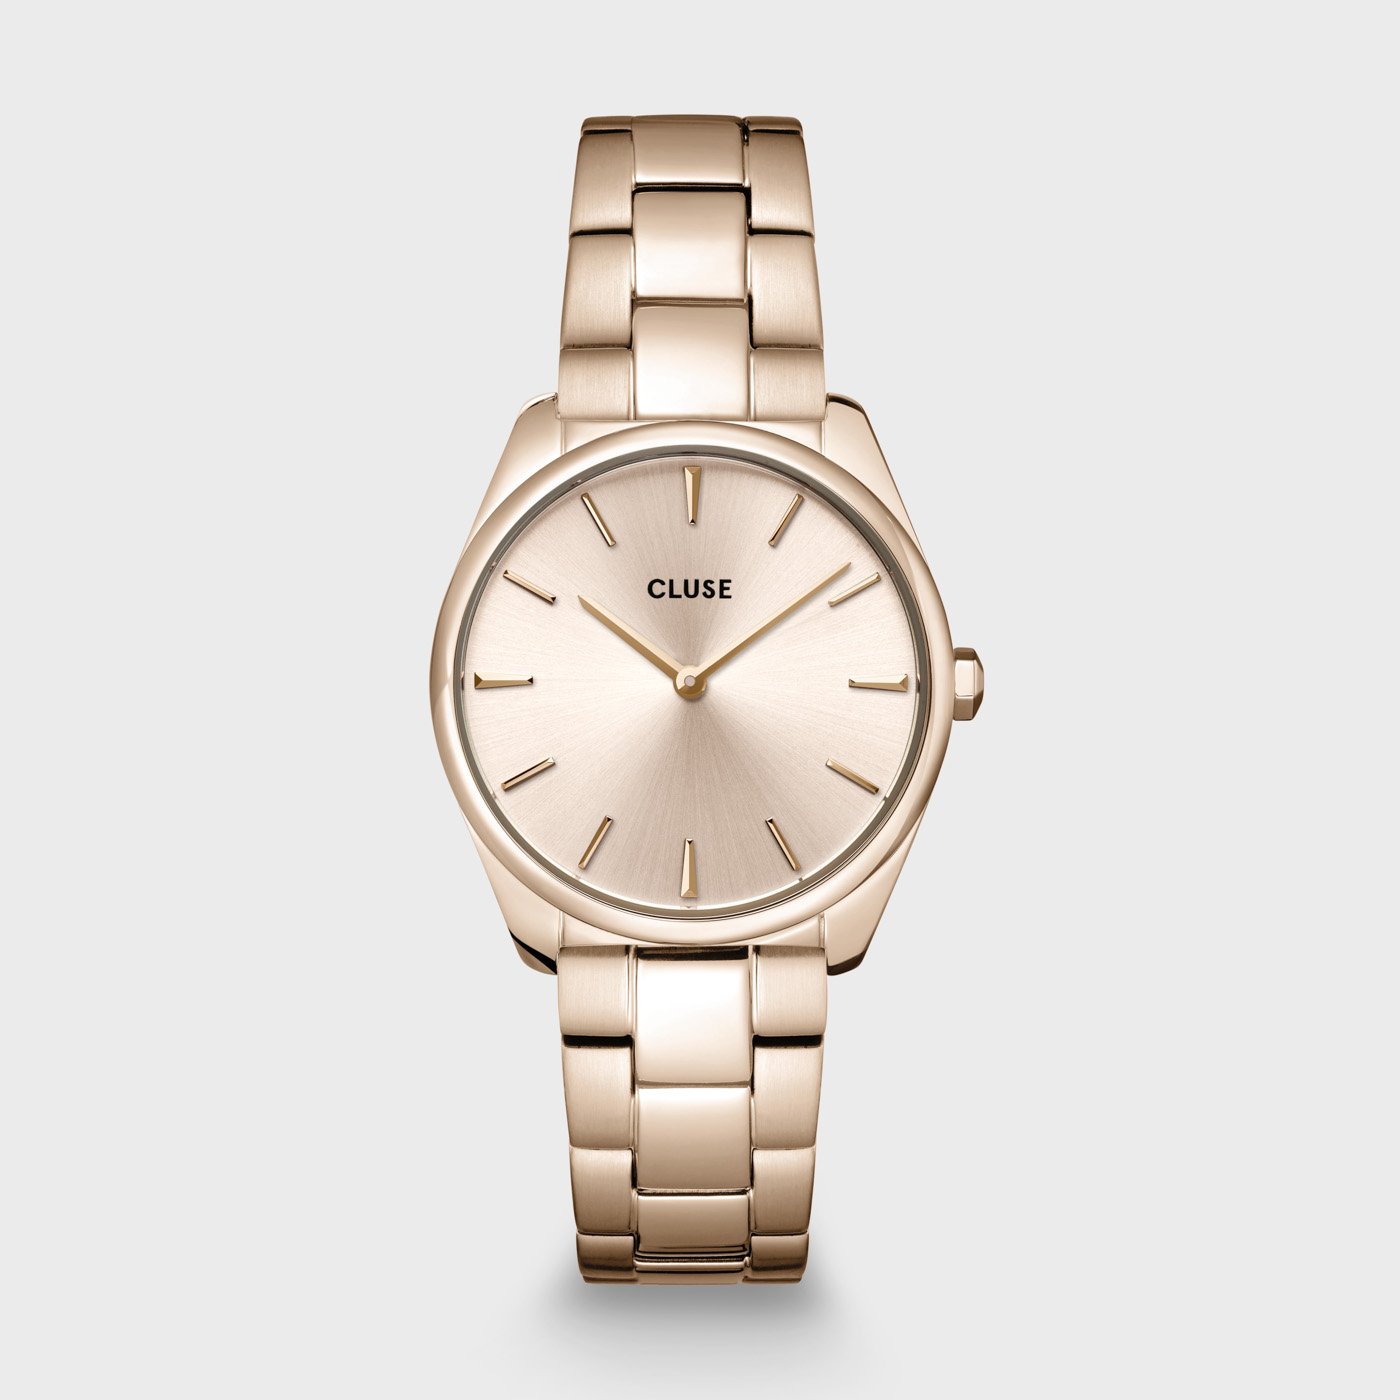 CLUSE Féroce Petite Watch CW11201 Pink Gold Colour - Official CLUSE Store